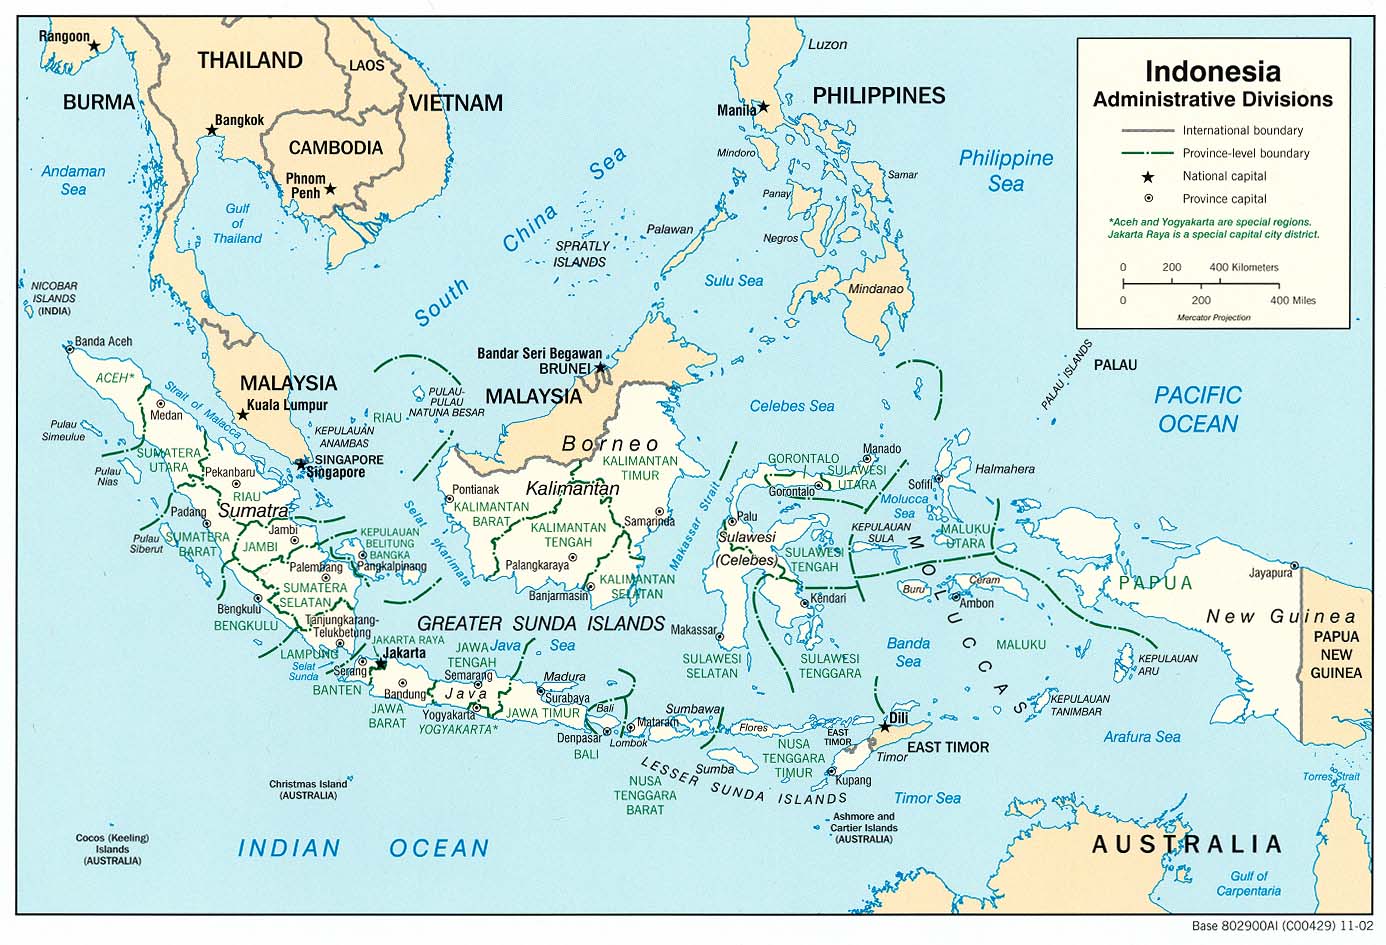 Indonesia Maps - Perry-Castañeda Map Collection - UT Library Online